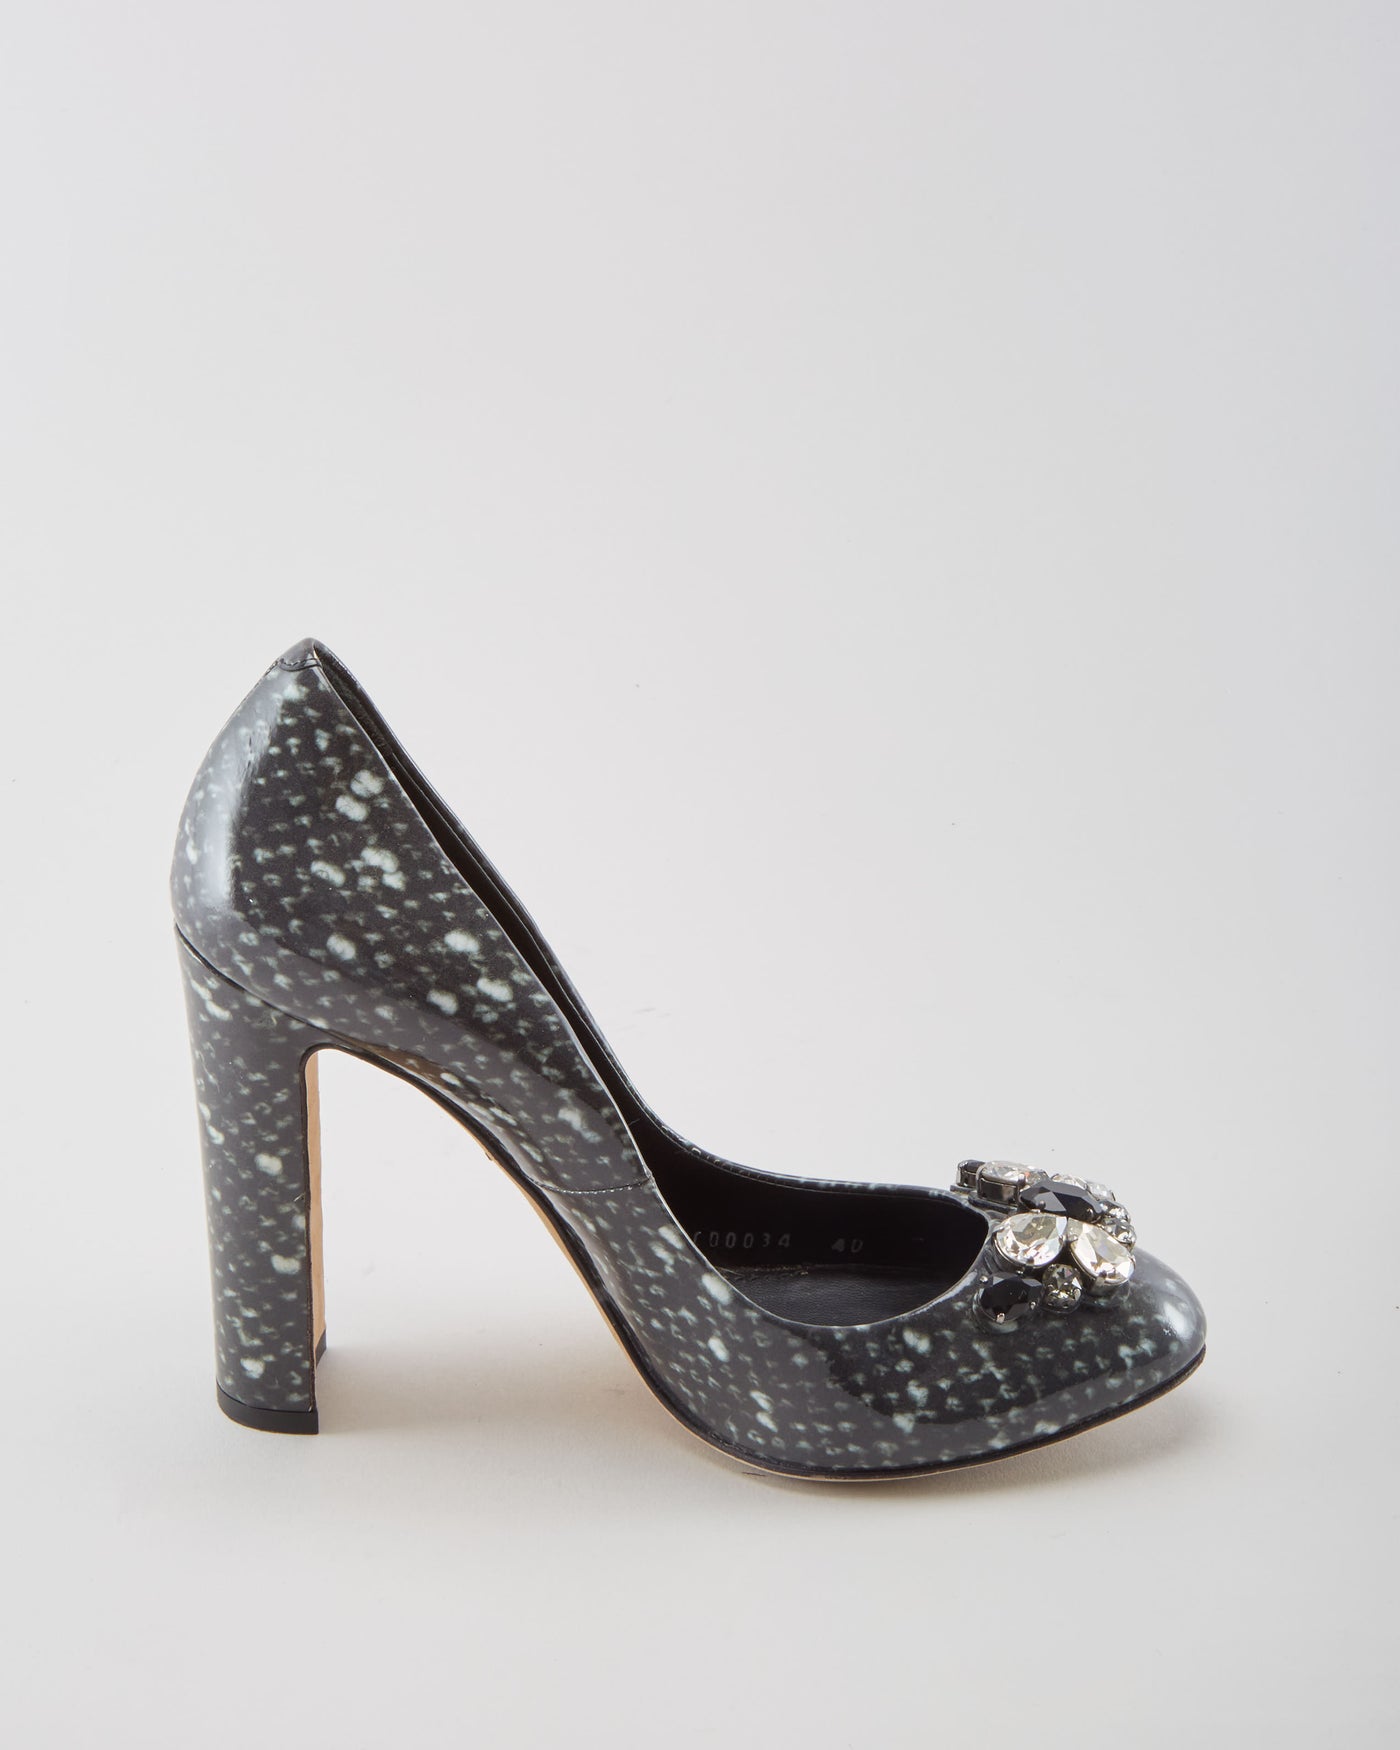 Dolce & Gabbana Heels With Crystals - Womens UK 7